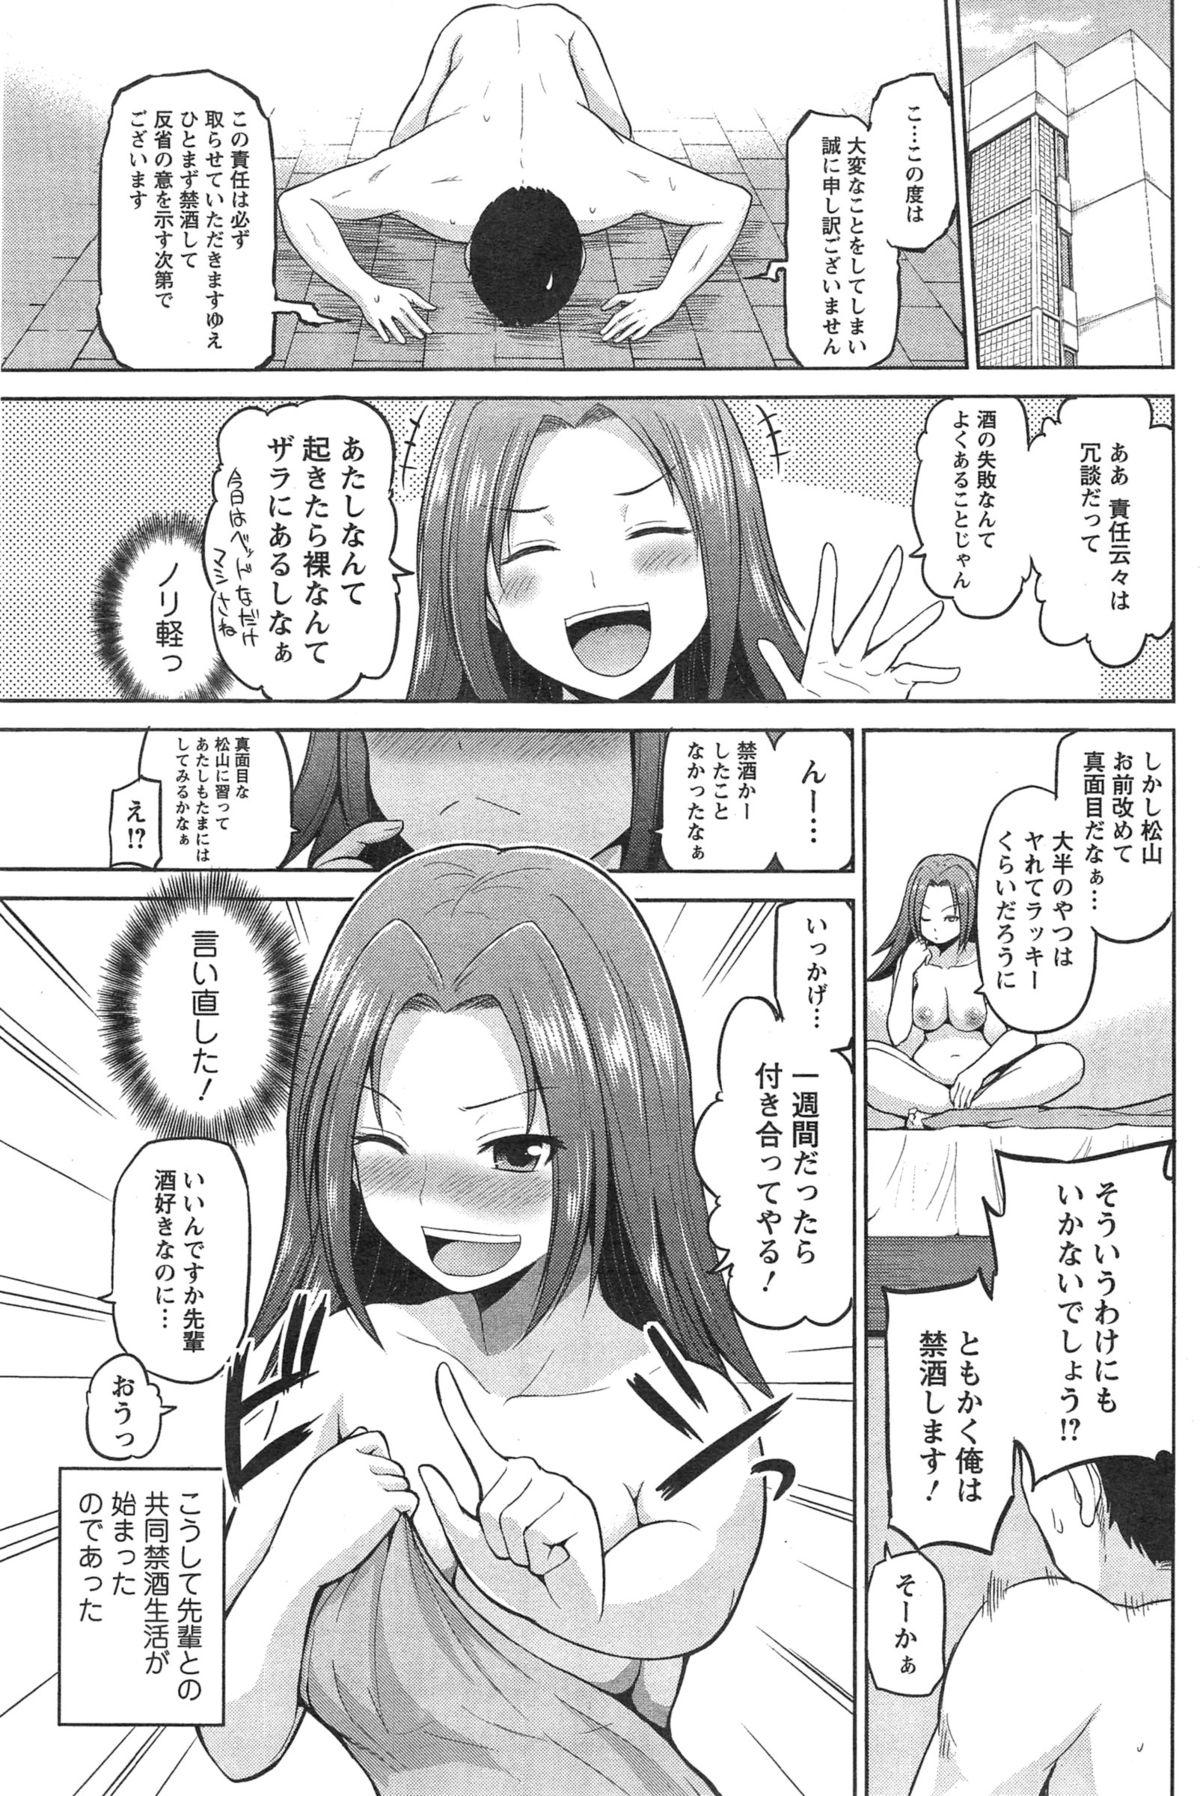 English Action Pizazz DX 2015-01 Blackmail - Page 7